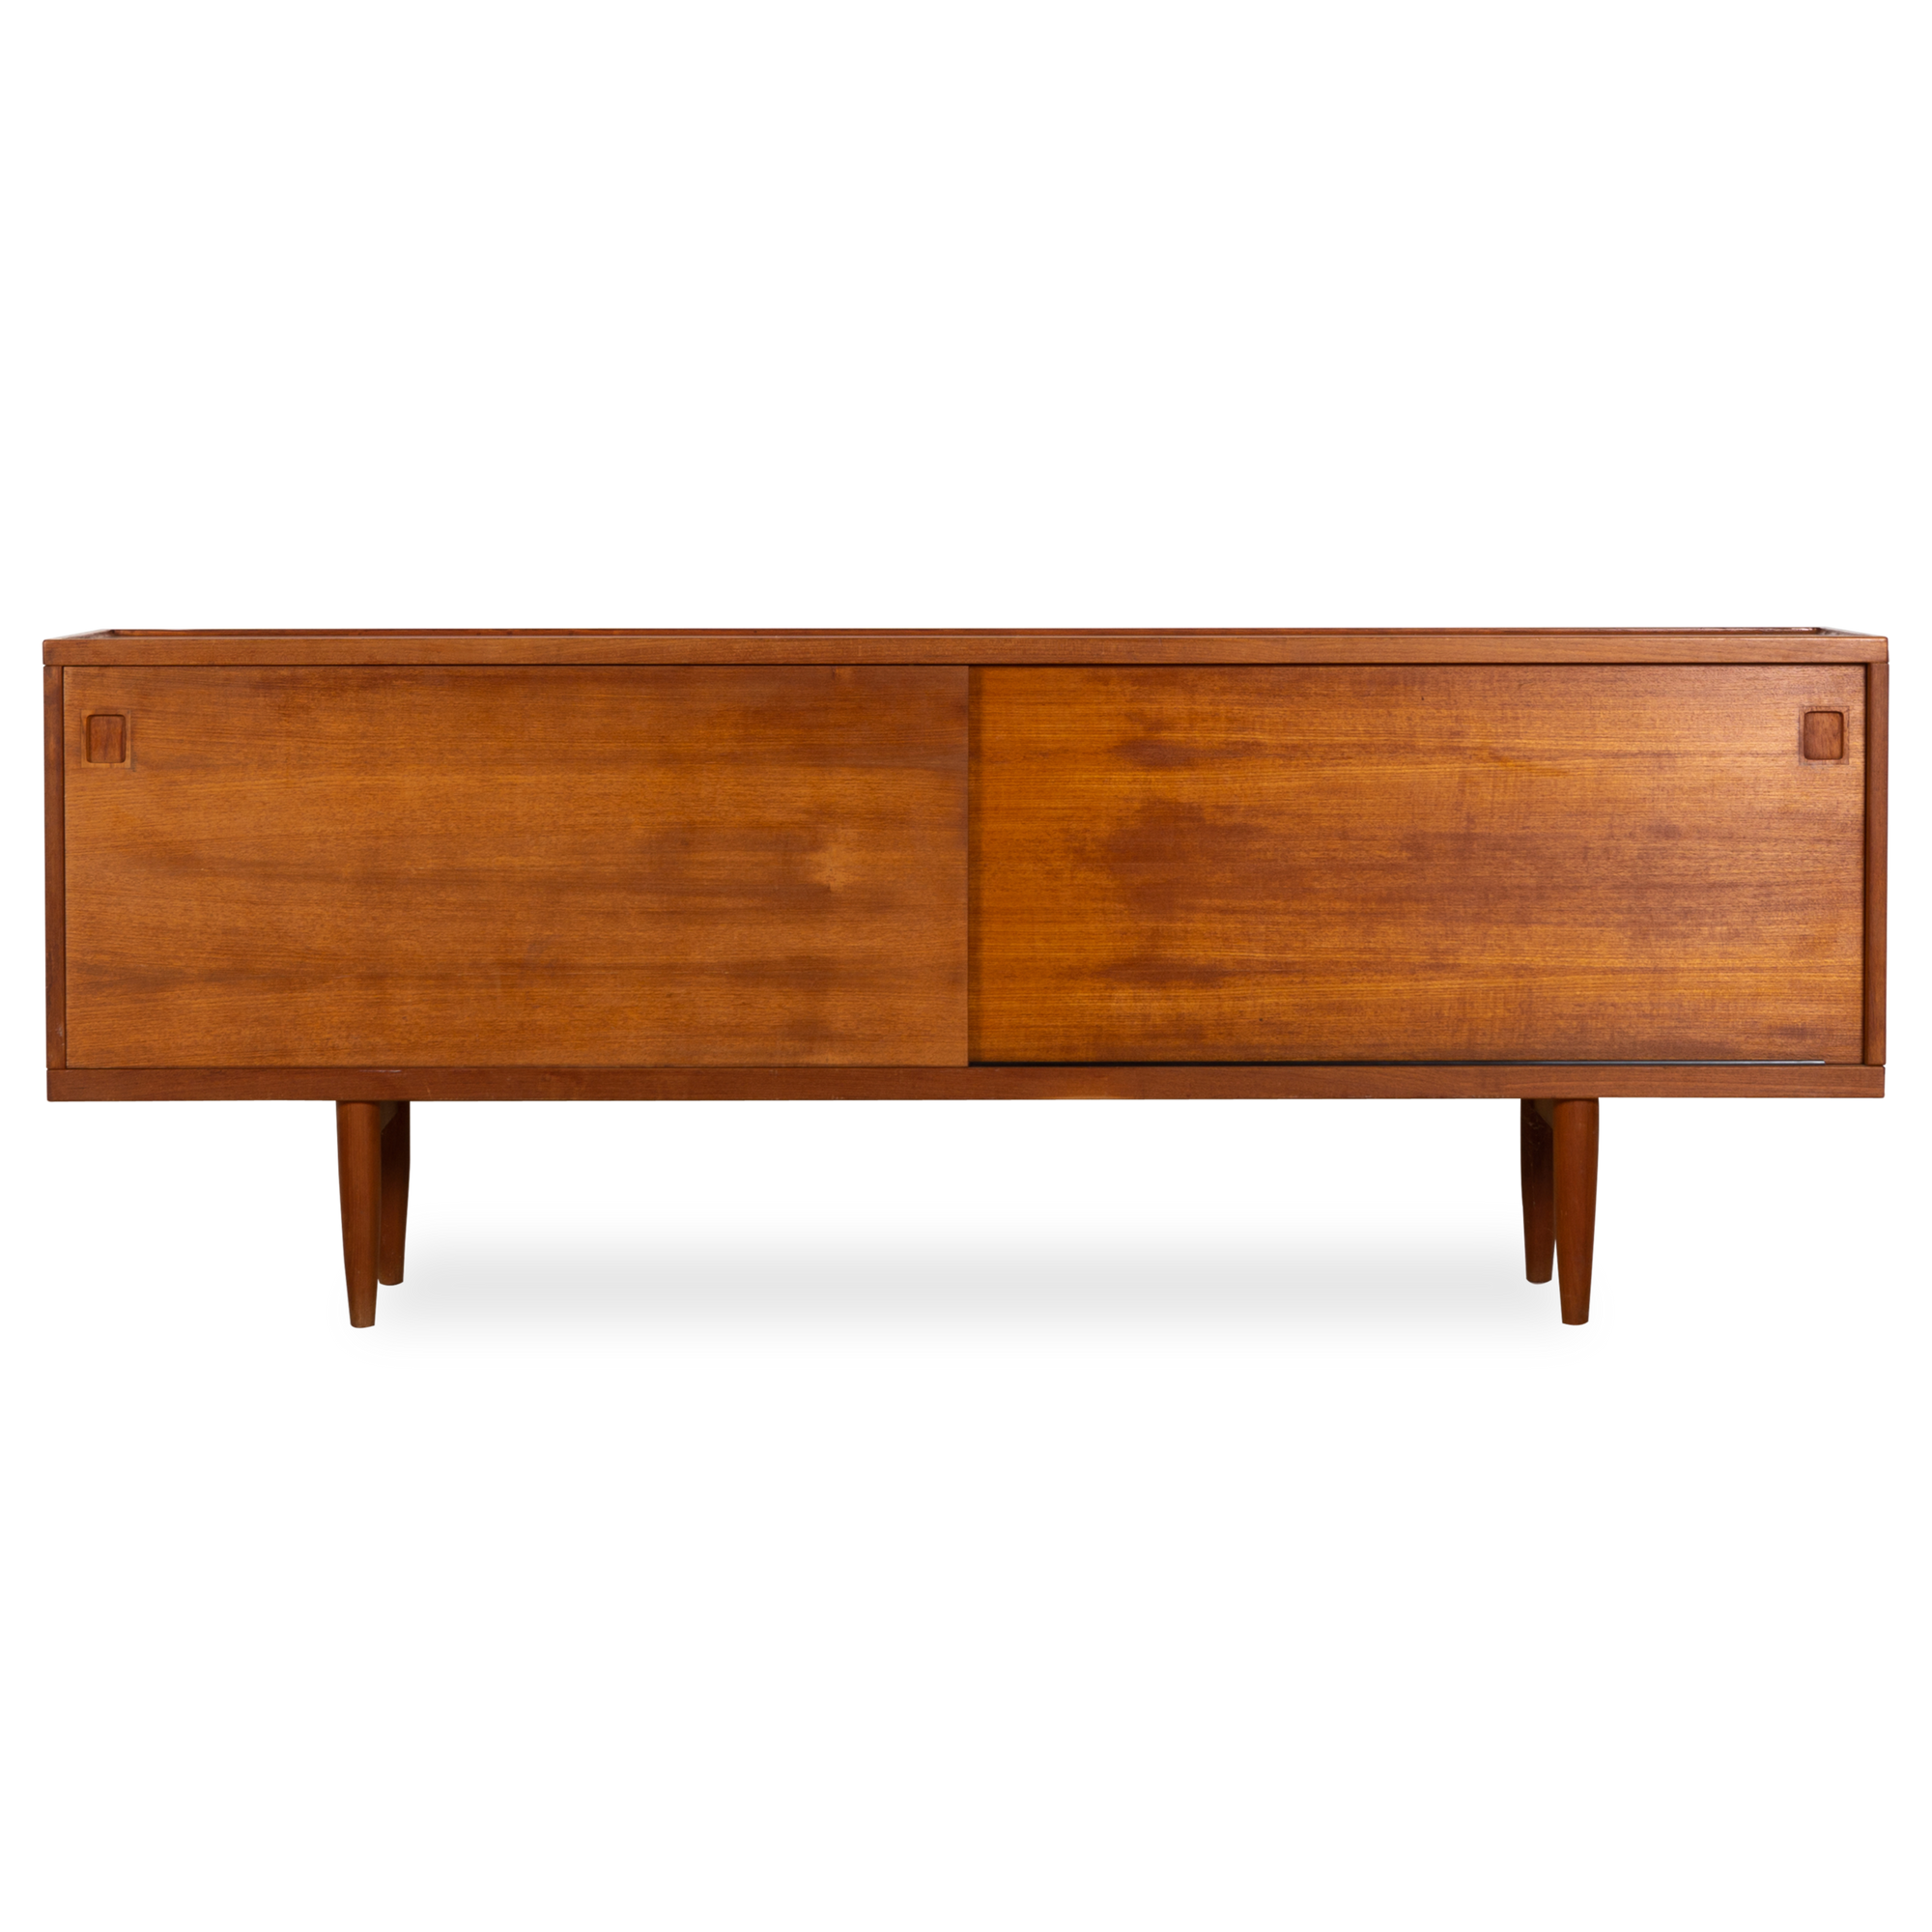 Displaying a richly aged finish, this vintage sideboard was by Niels Otto Moller and manufactured by J.